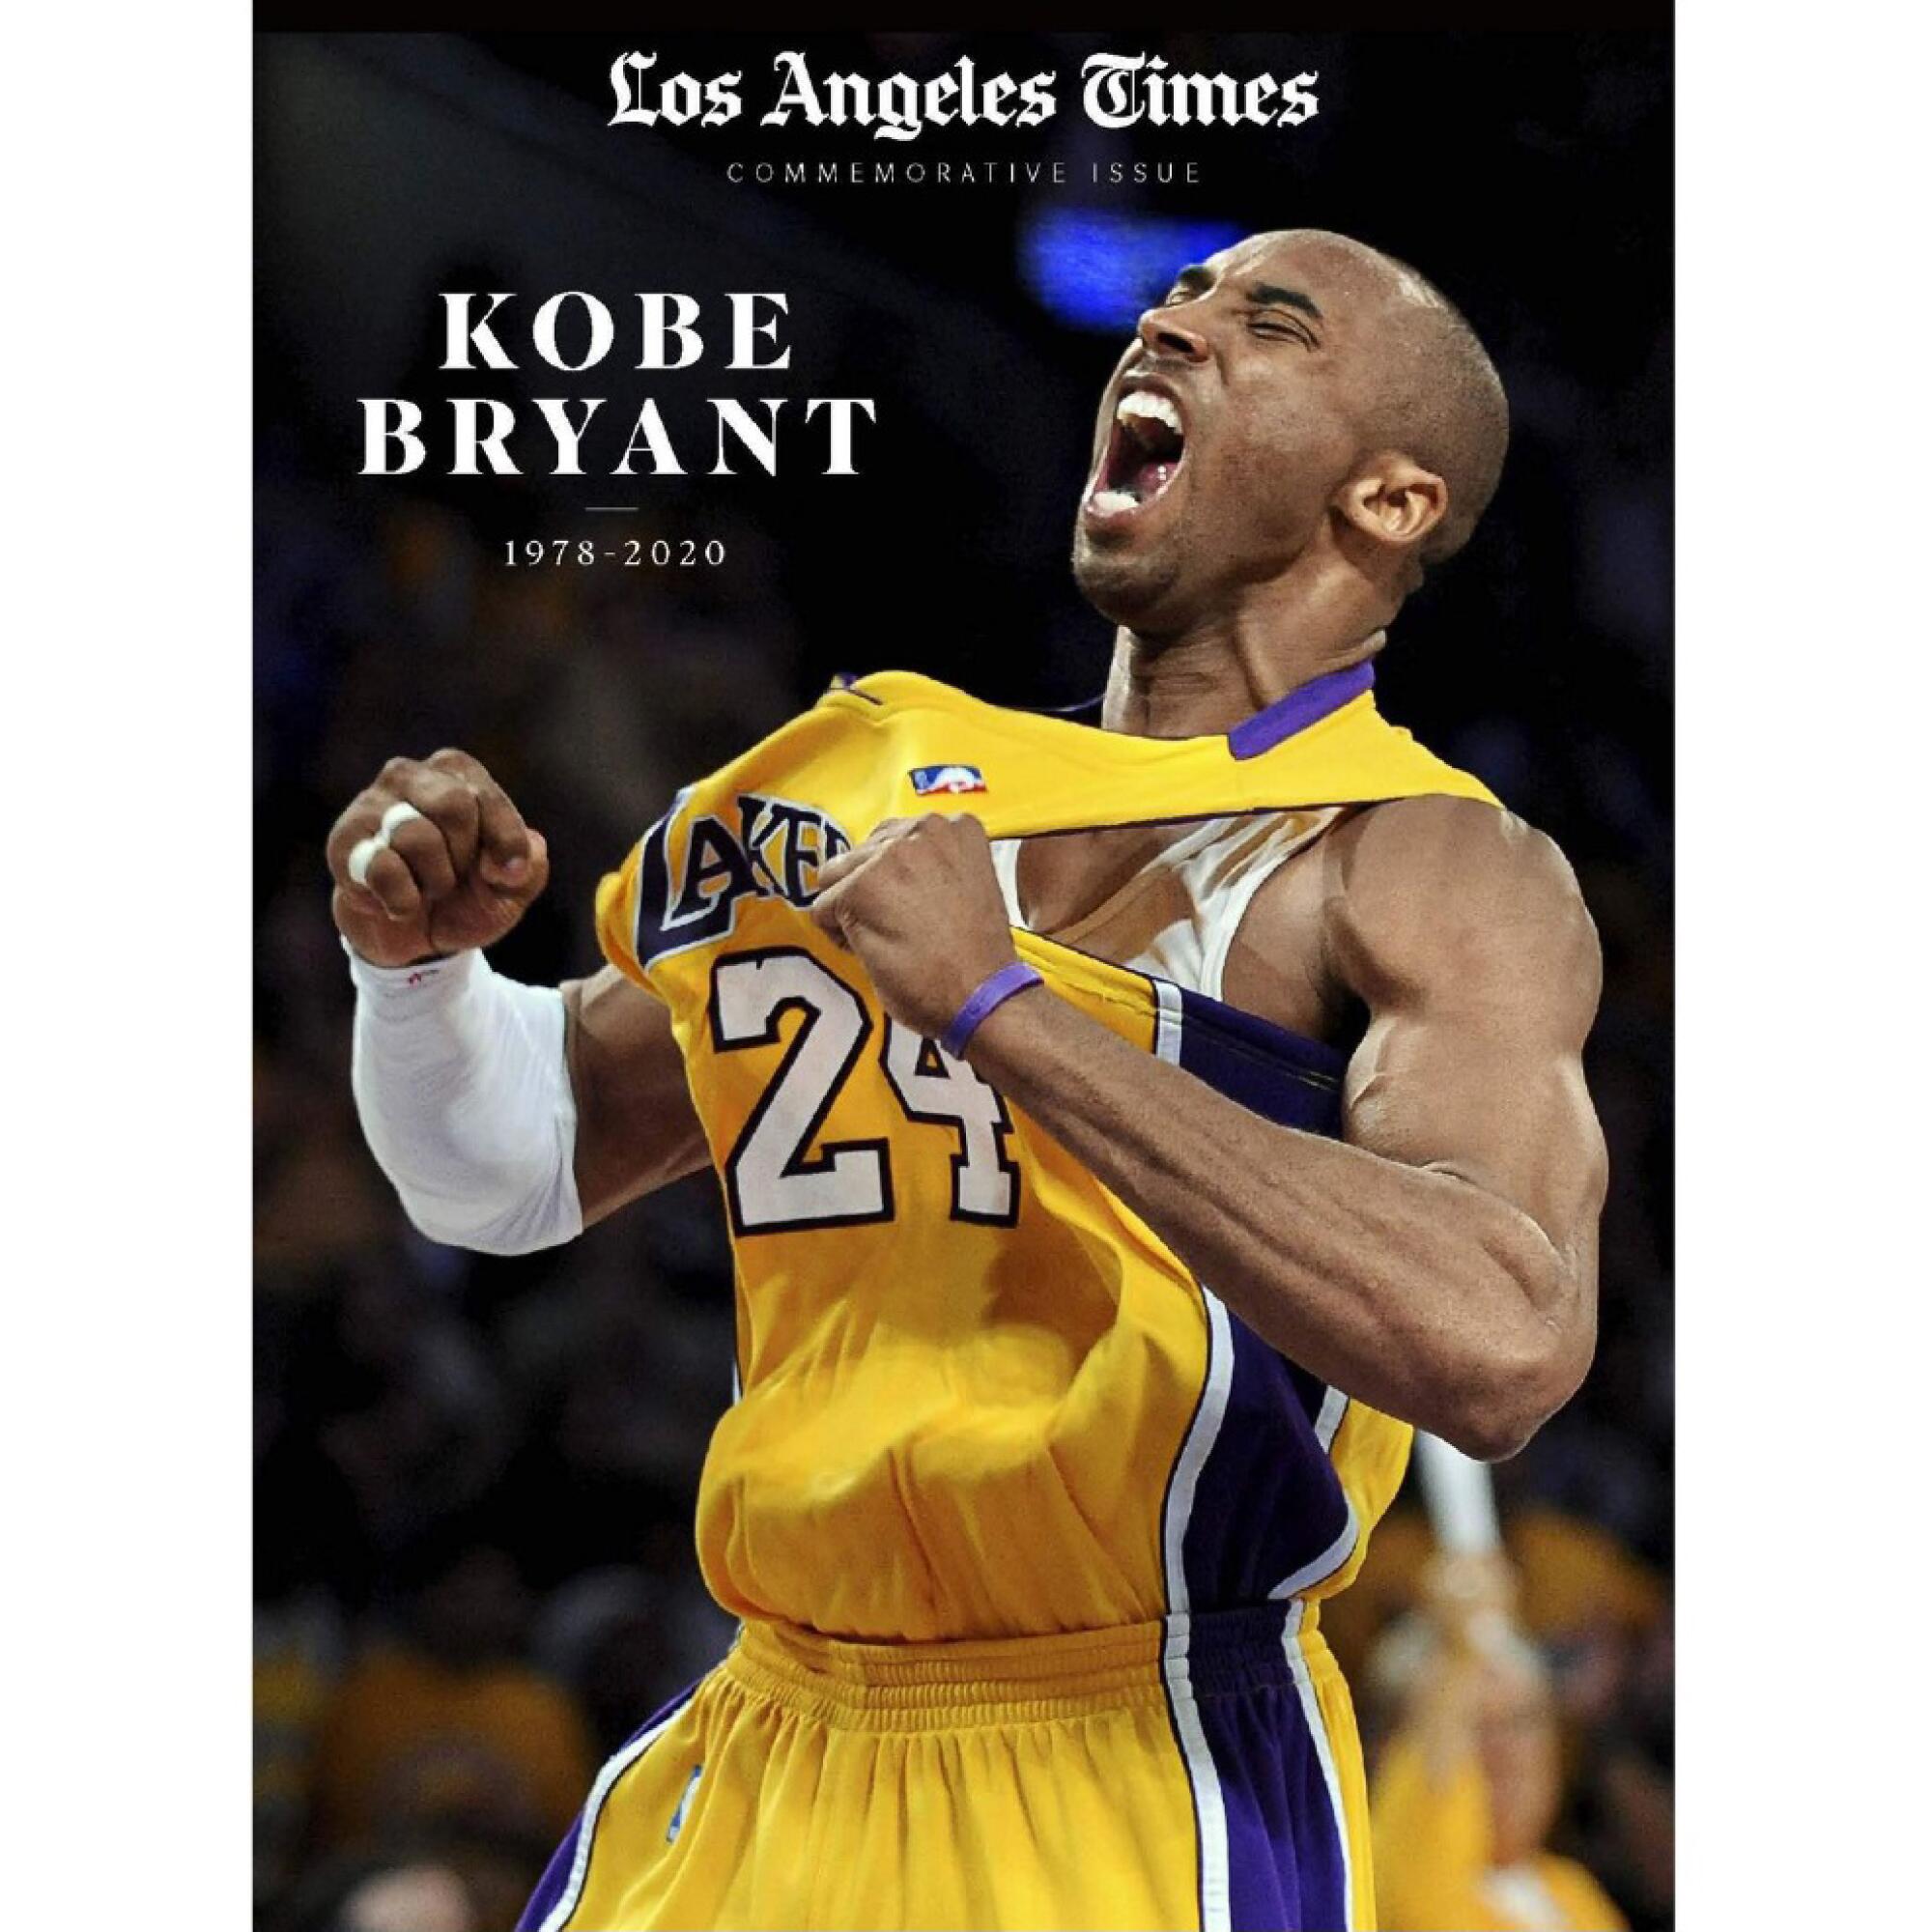 Kobe Bryant fans have a wide array of options to celebrate the life of the Lakers legend.